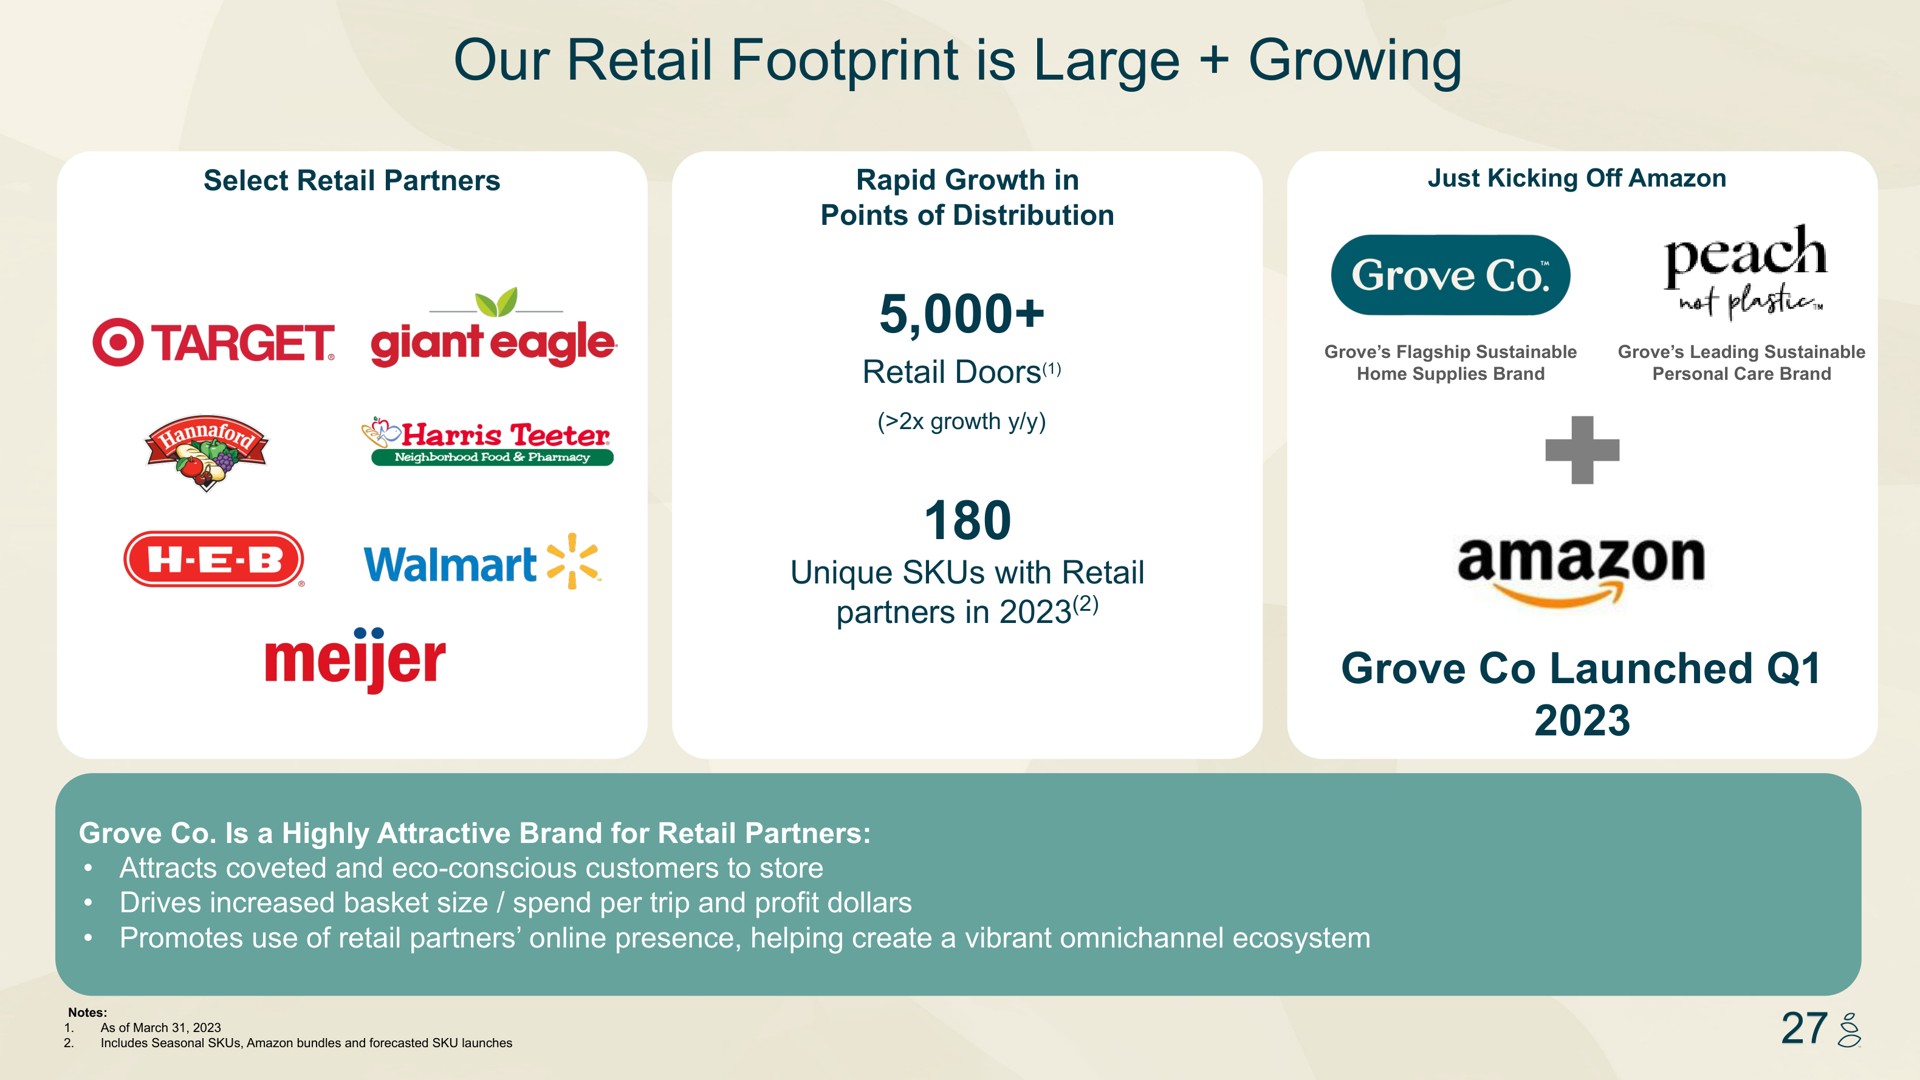 our retail footprint is large growing grove launched target giant eagle unique with peach each | Grove